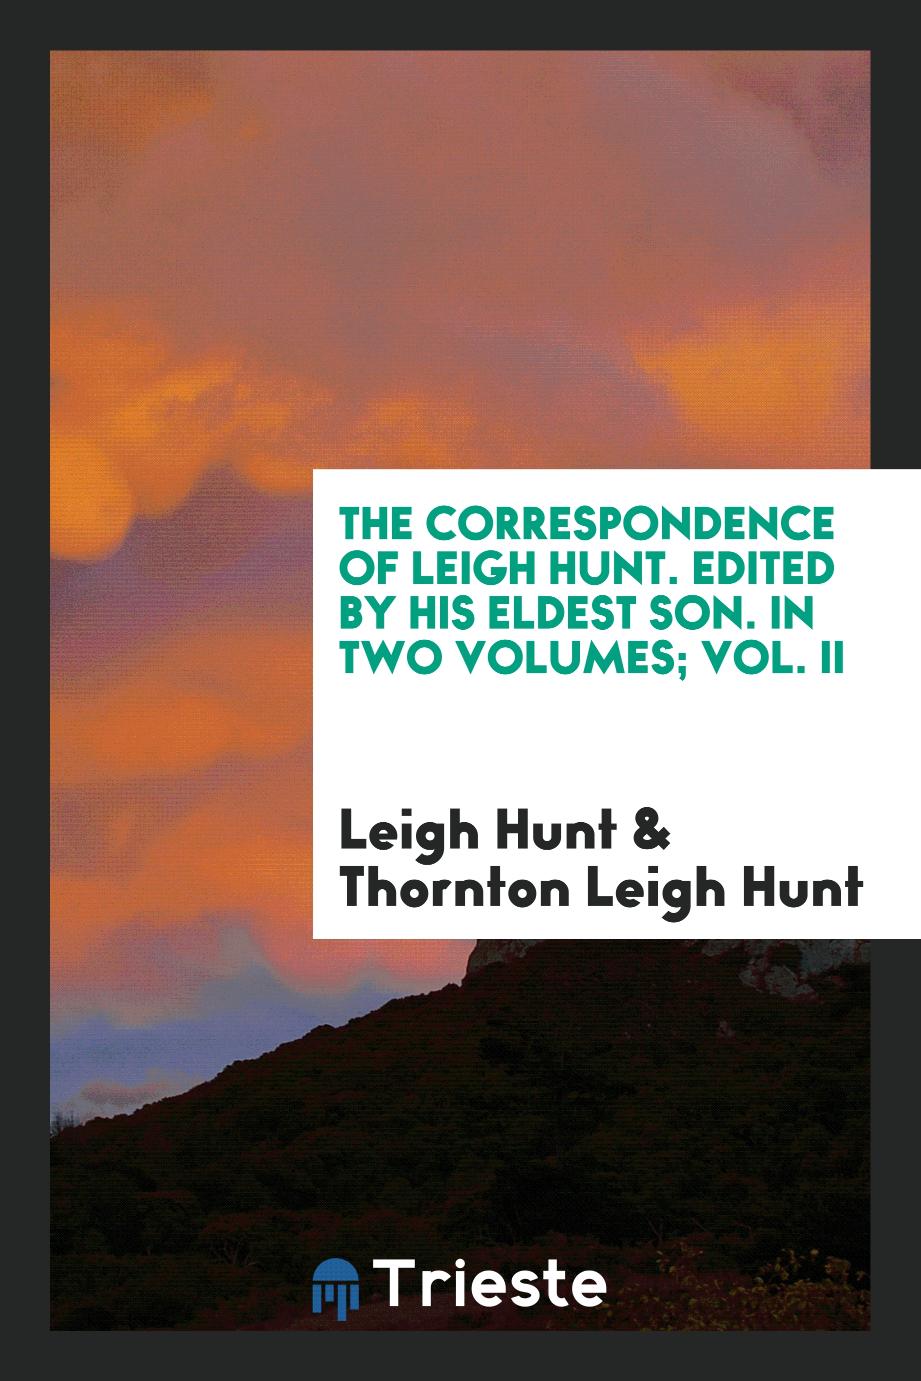 The Correspondence of Leigh Hunt. Edited by His Eldest Son. In Two Volumes; Vol. II